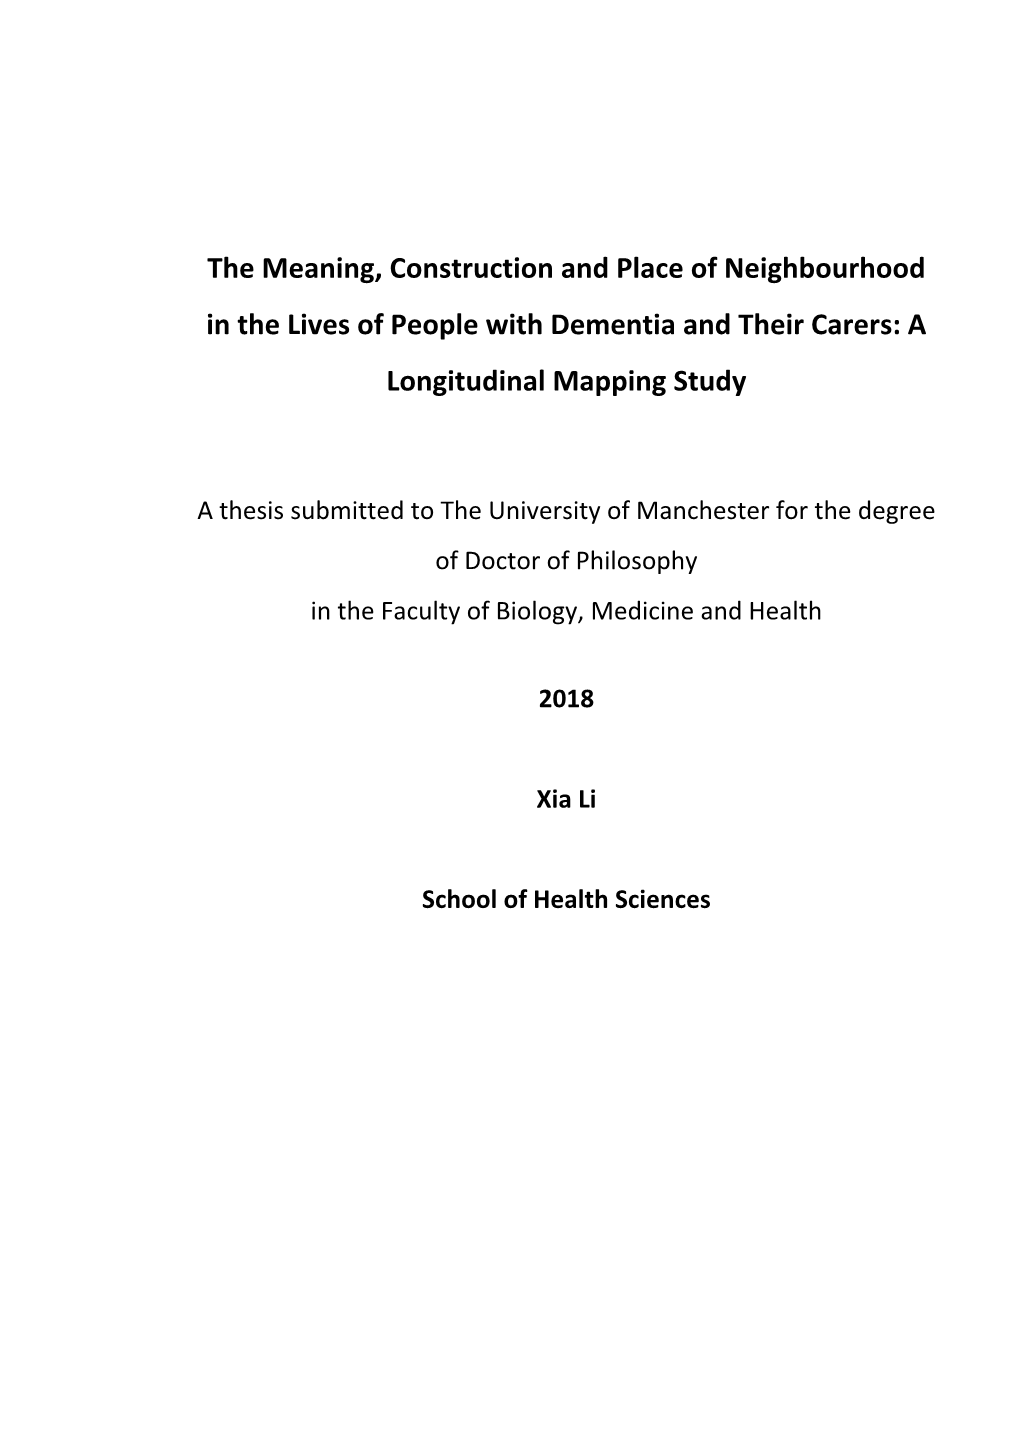 The Meaning, Construction and Place of Neighbourhood in the Lives of People with Dementia and Their Carers: a Longitudinal Mapping Study